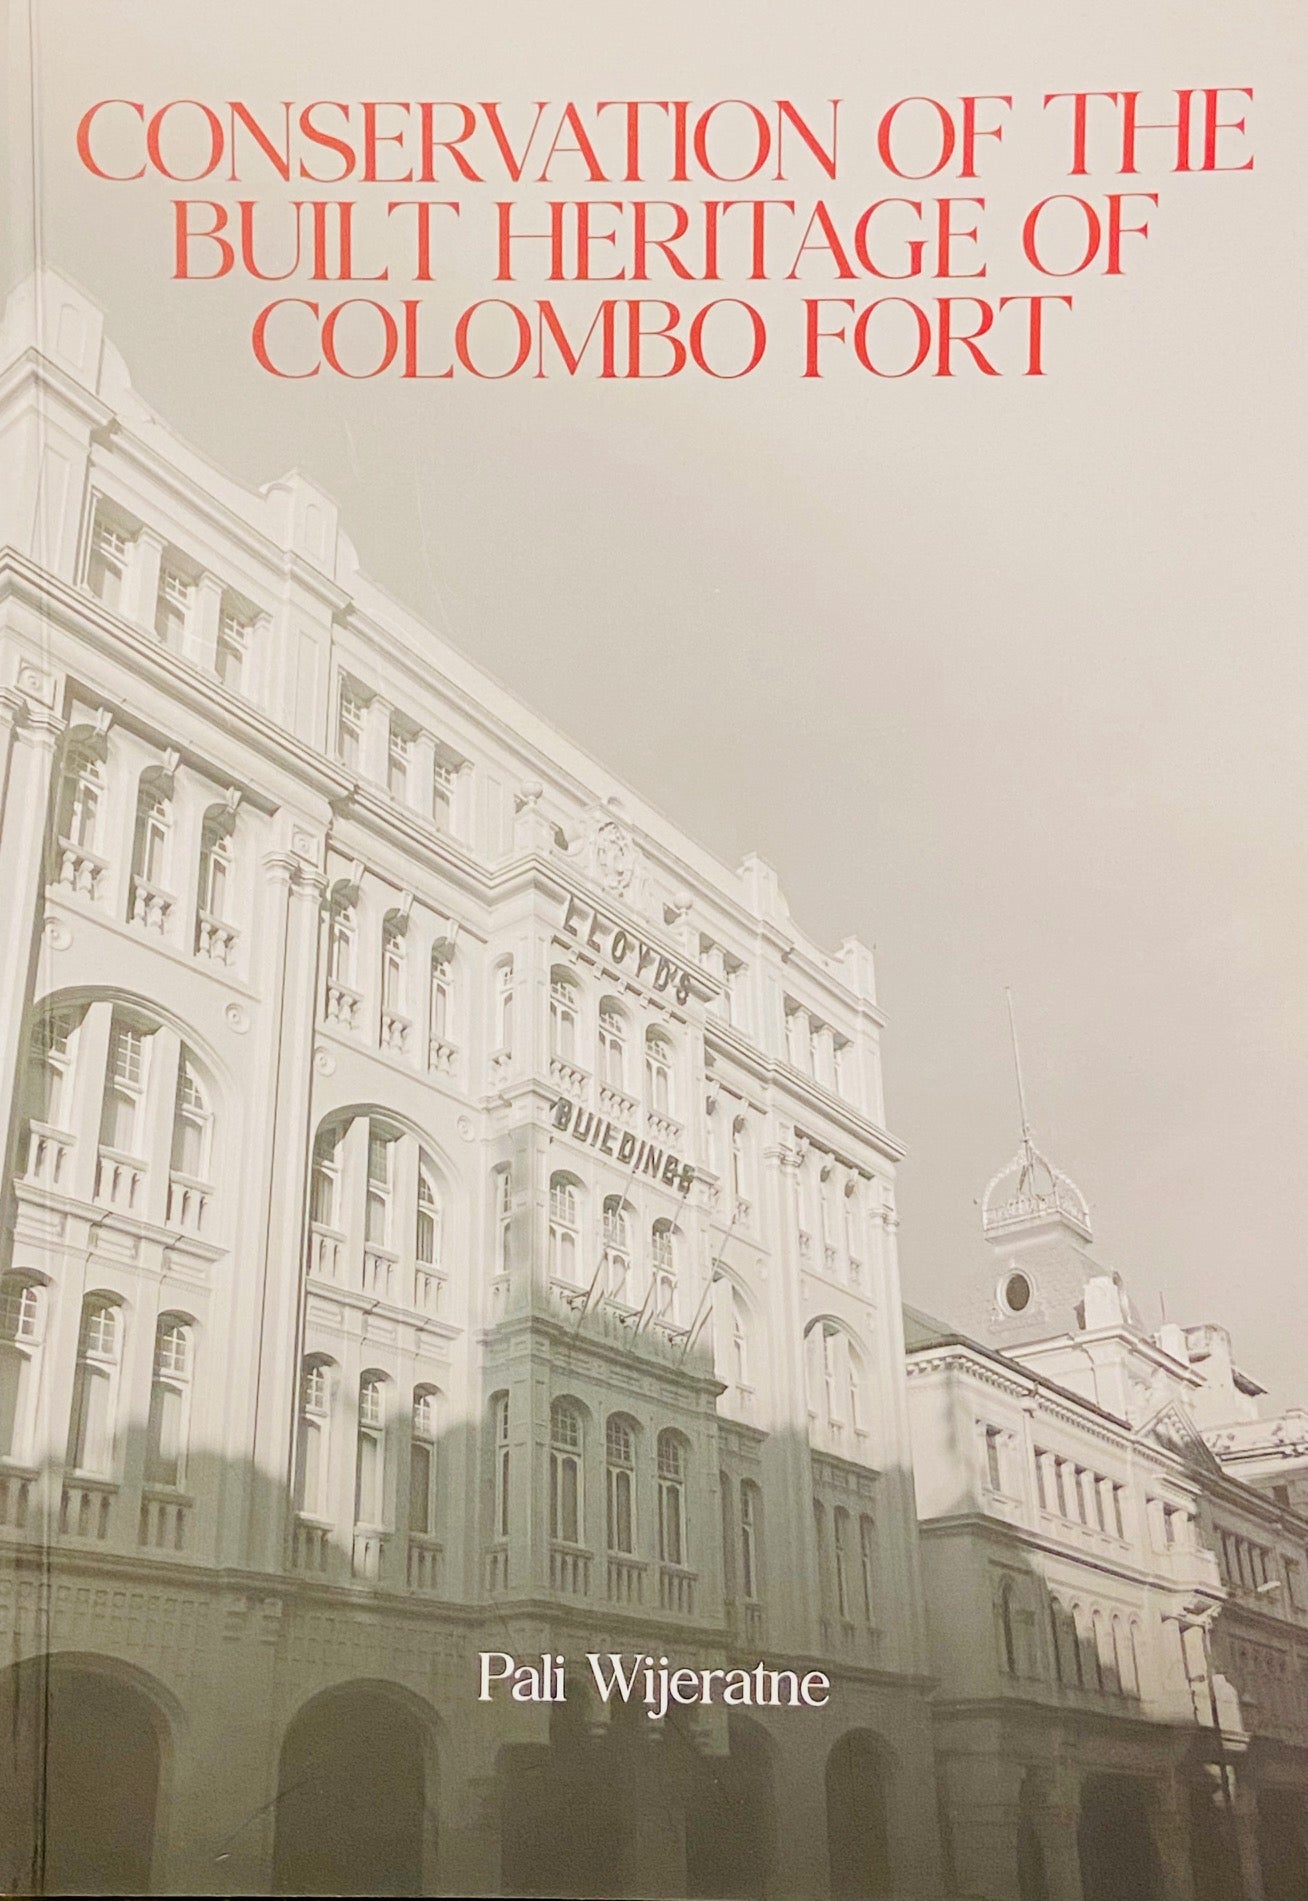 Conservation of the Built Heritage of Colombo Fort by Pali Wijeratne